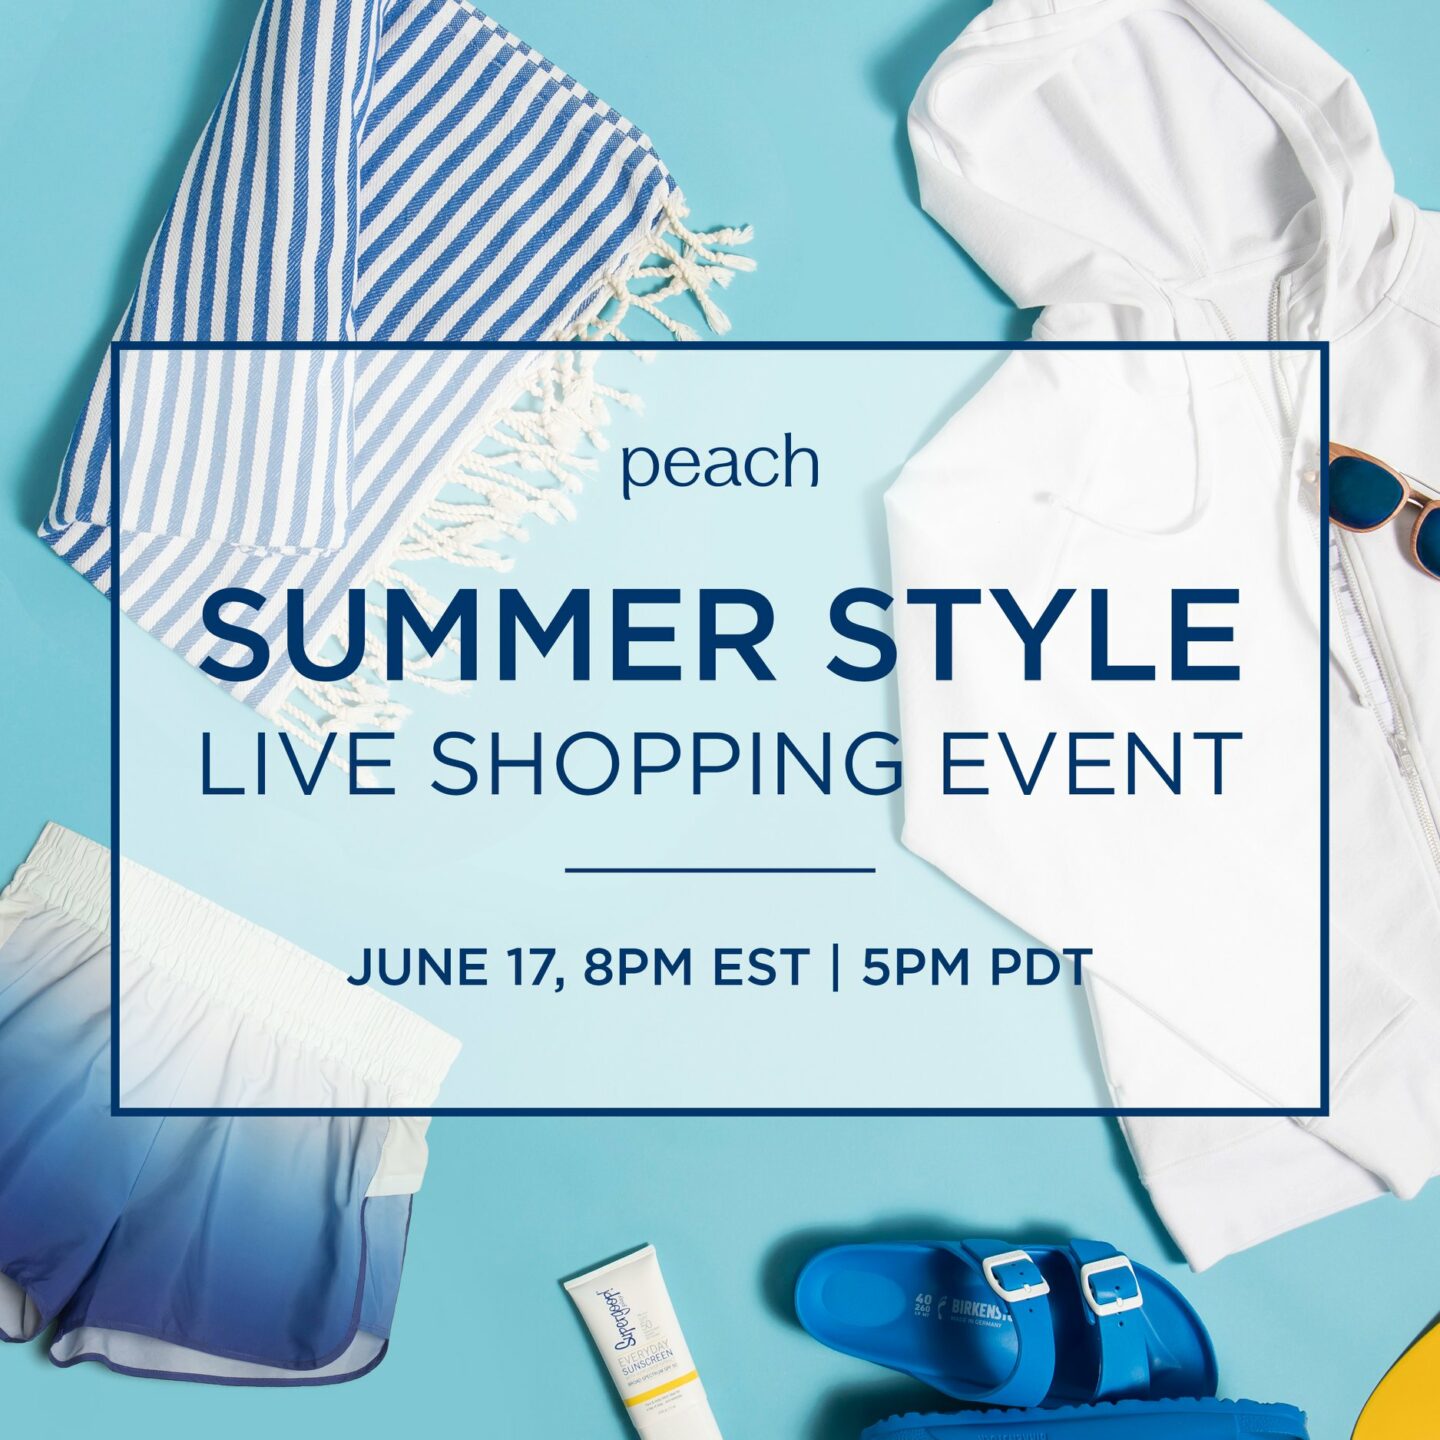 Peach Summer Style Live Shopping Event